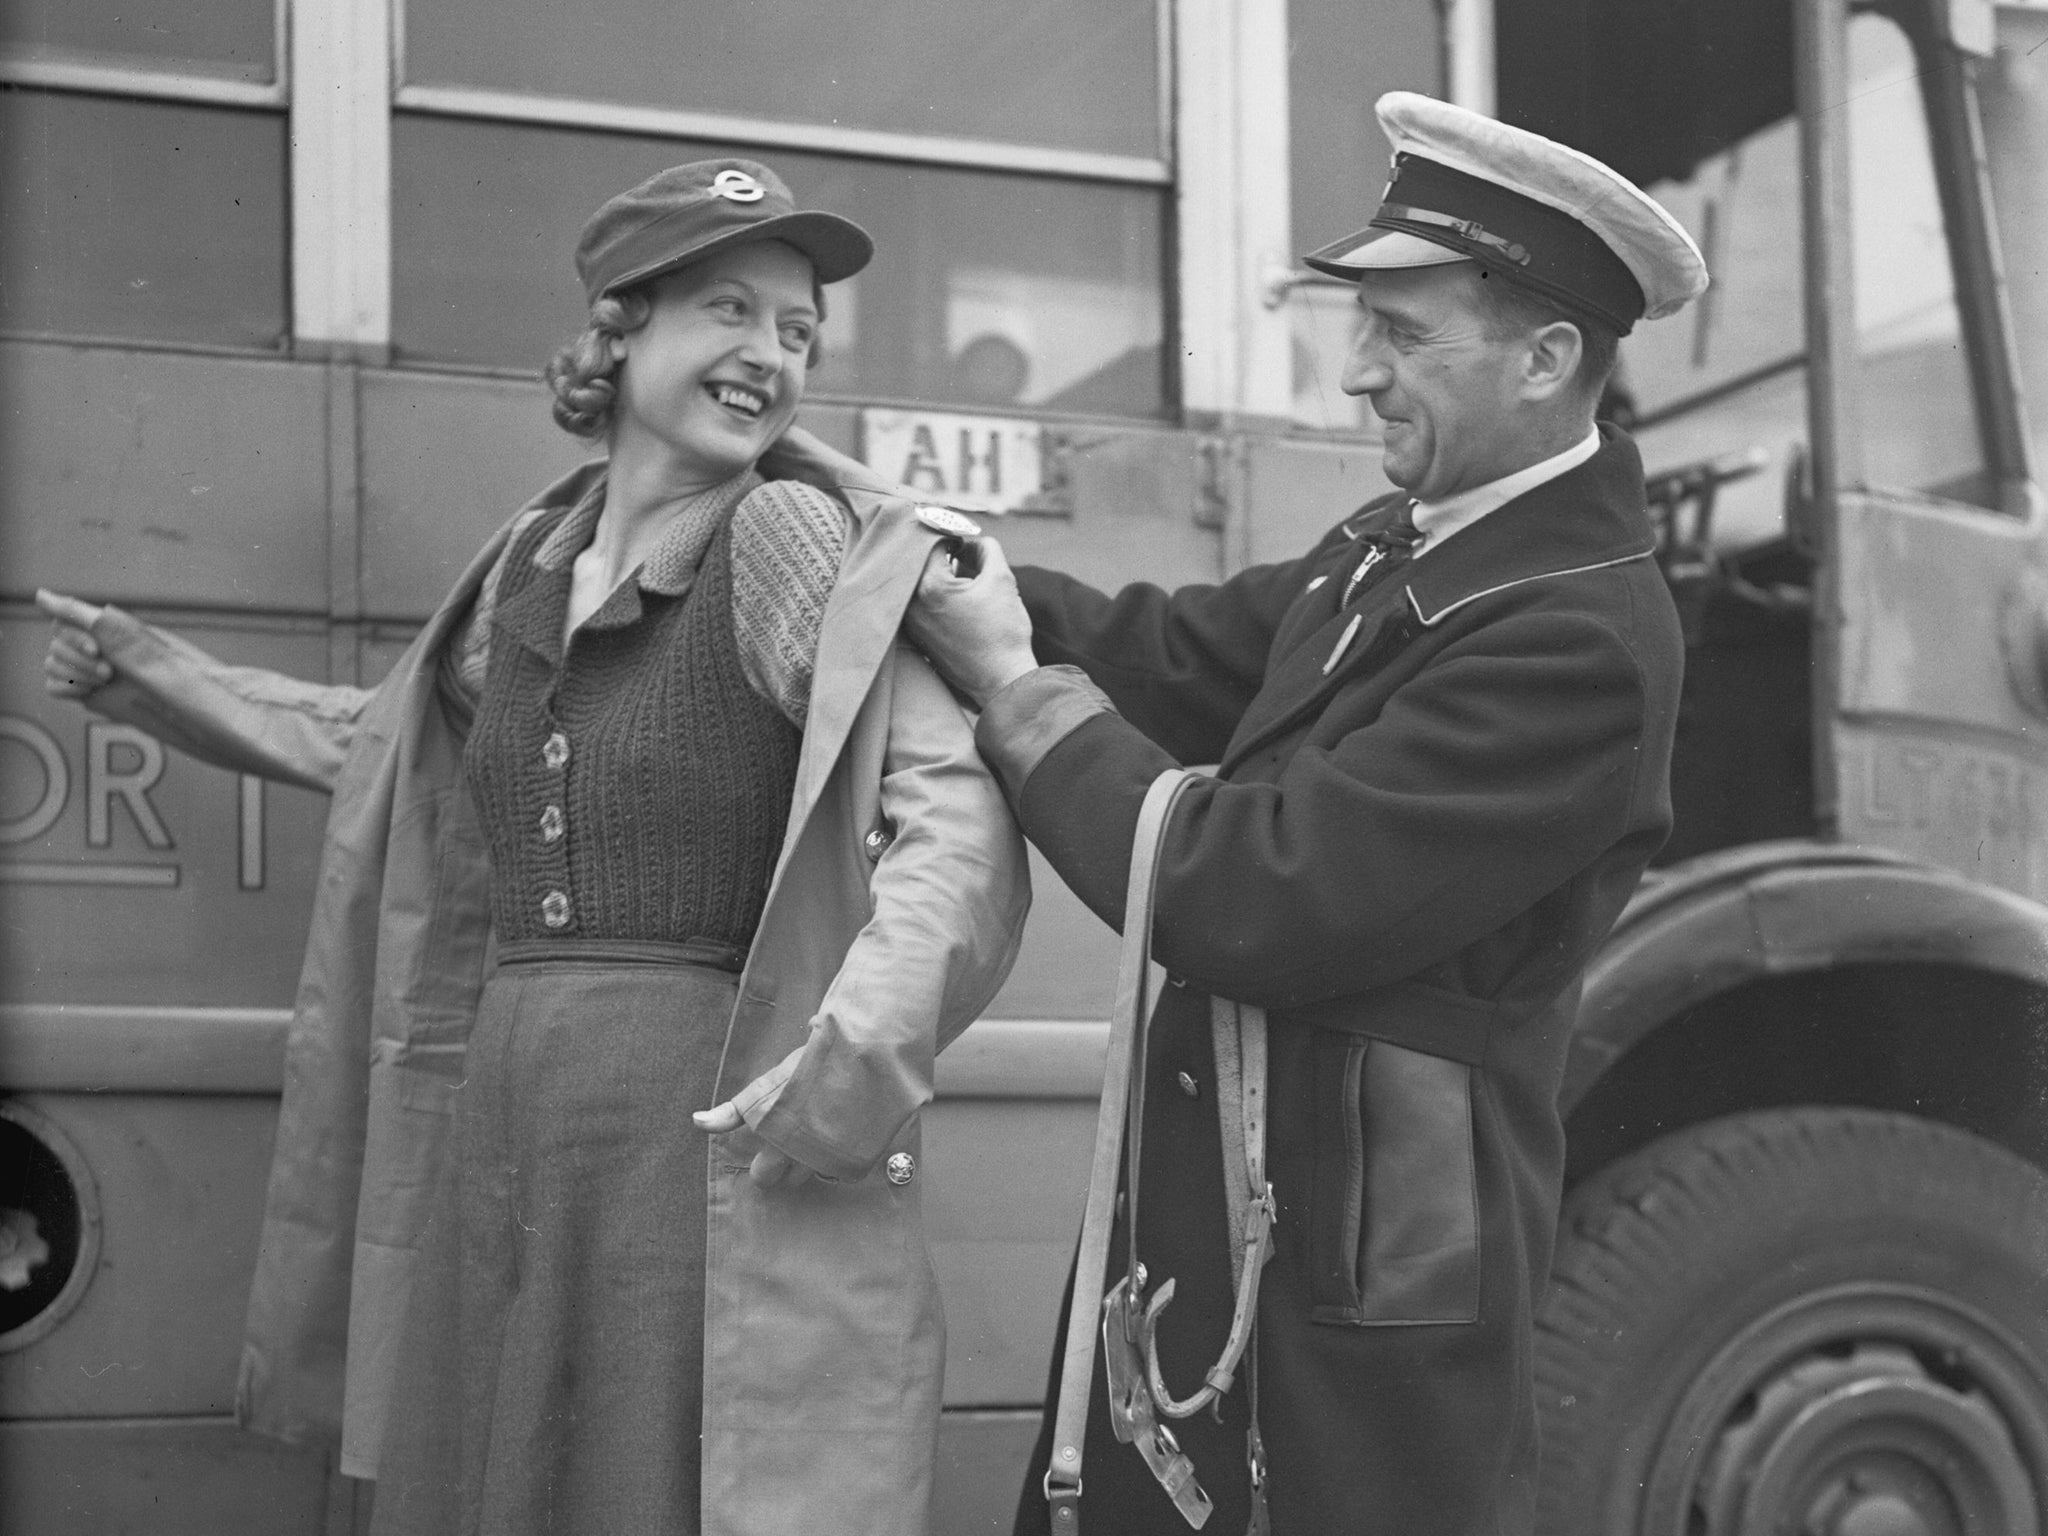 Lend a hand: a 'clippie', (female bus conductor) is helped into her uniform by a bus driver in 1941 (Getty Images)